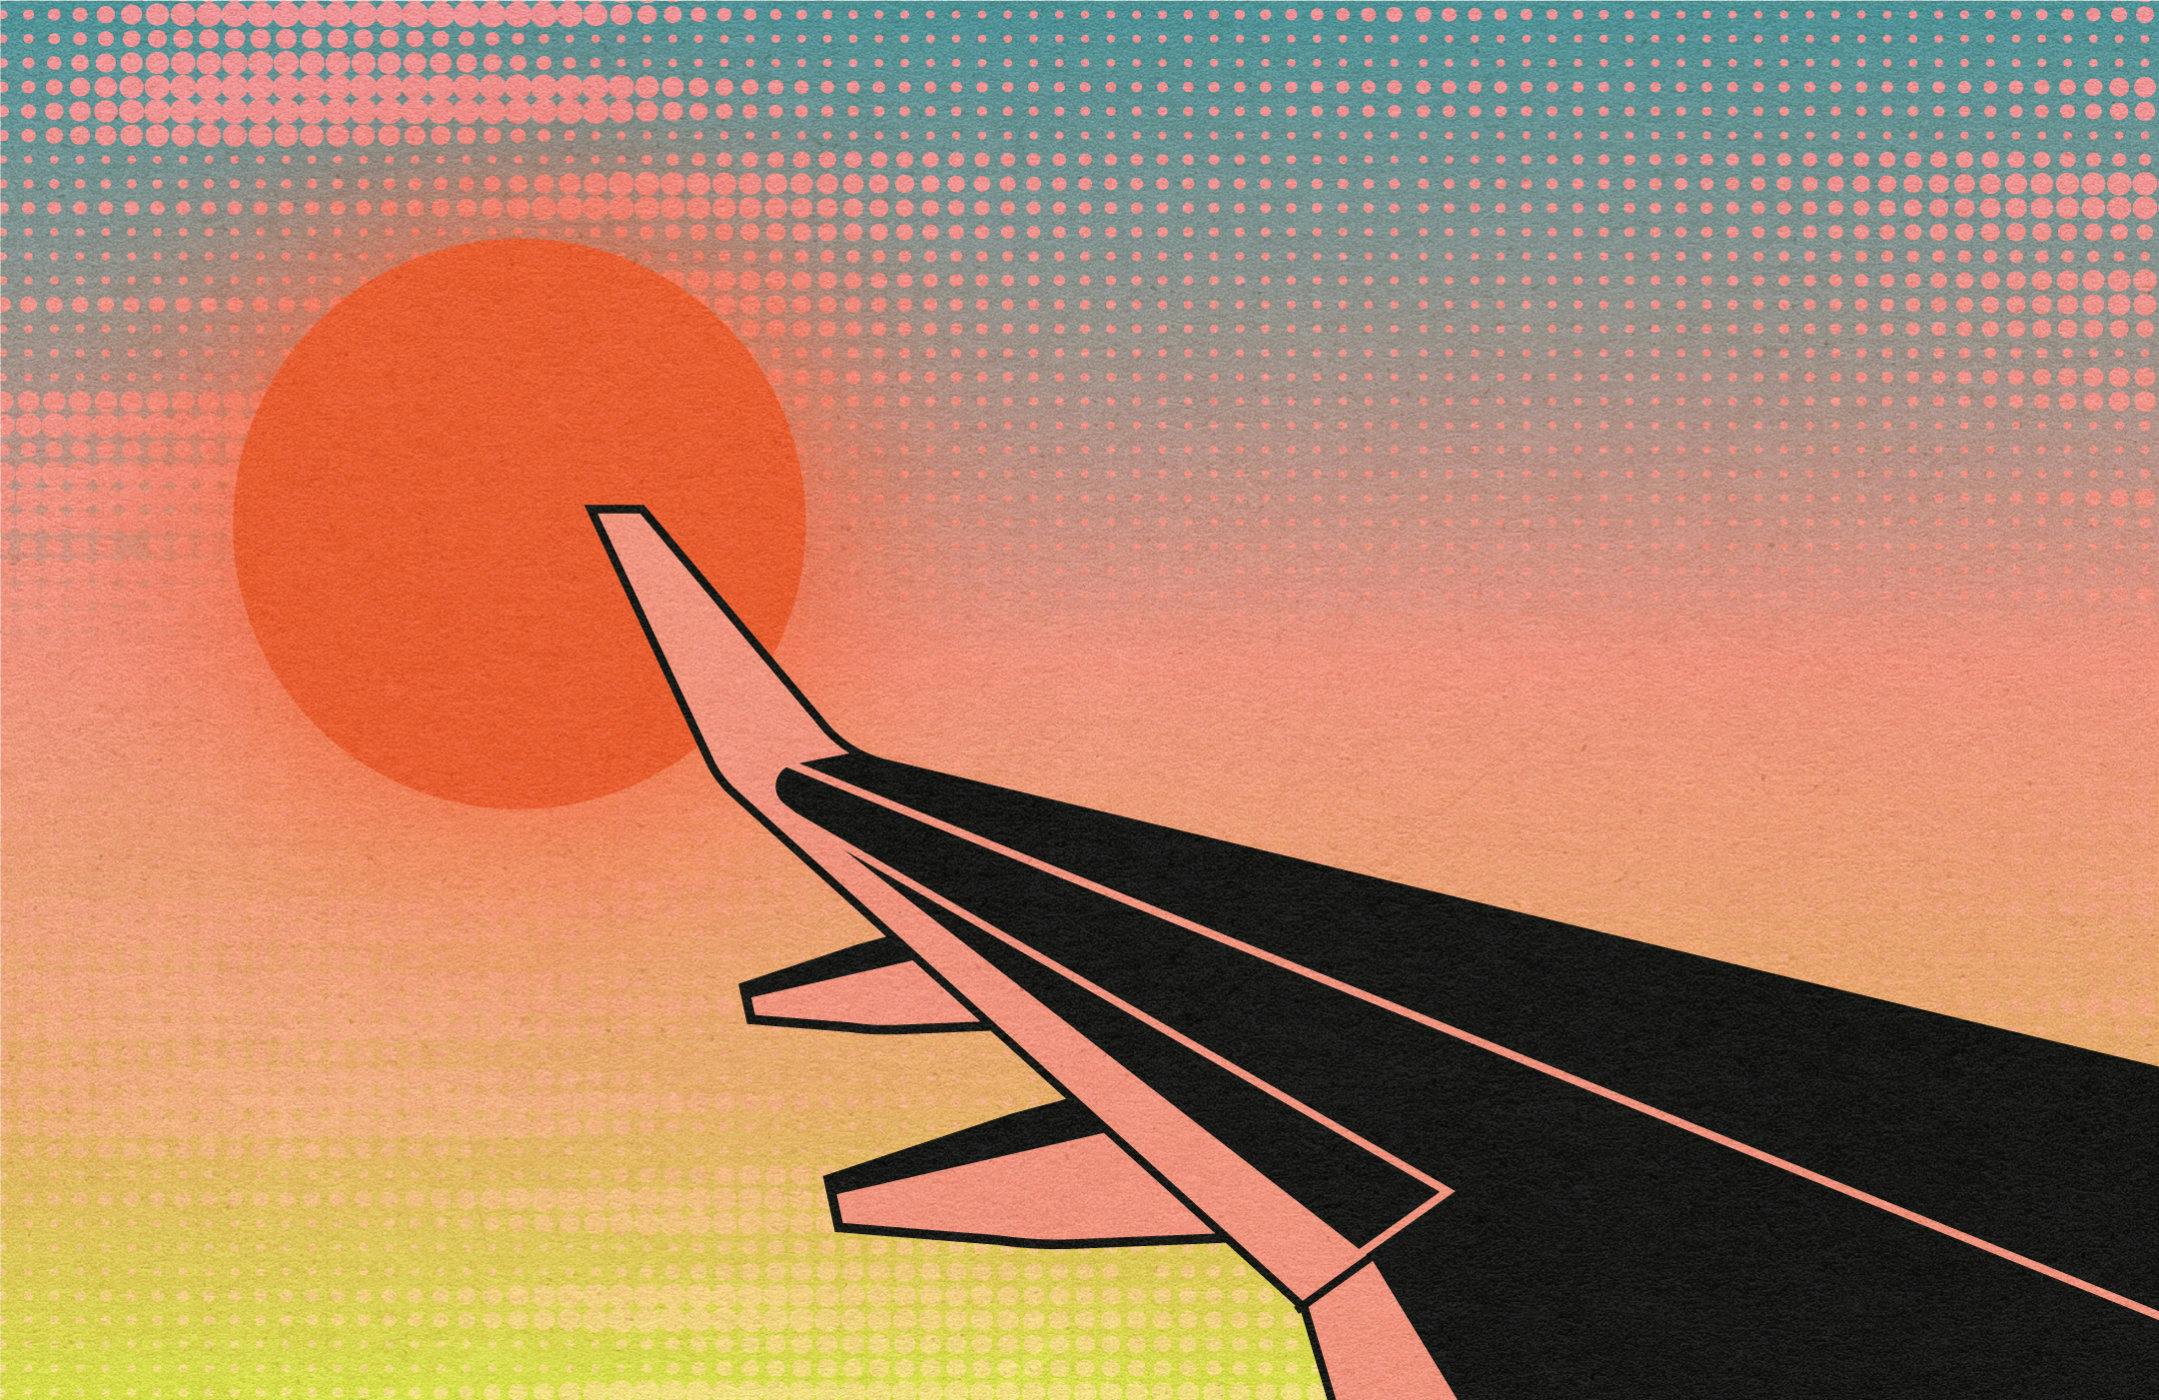 Illustration of airplane wing and sun at sunset